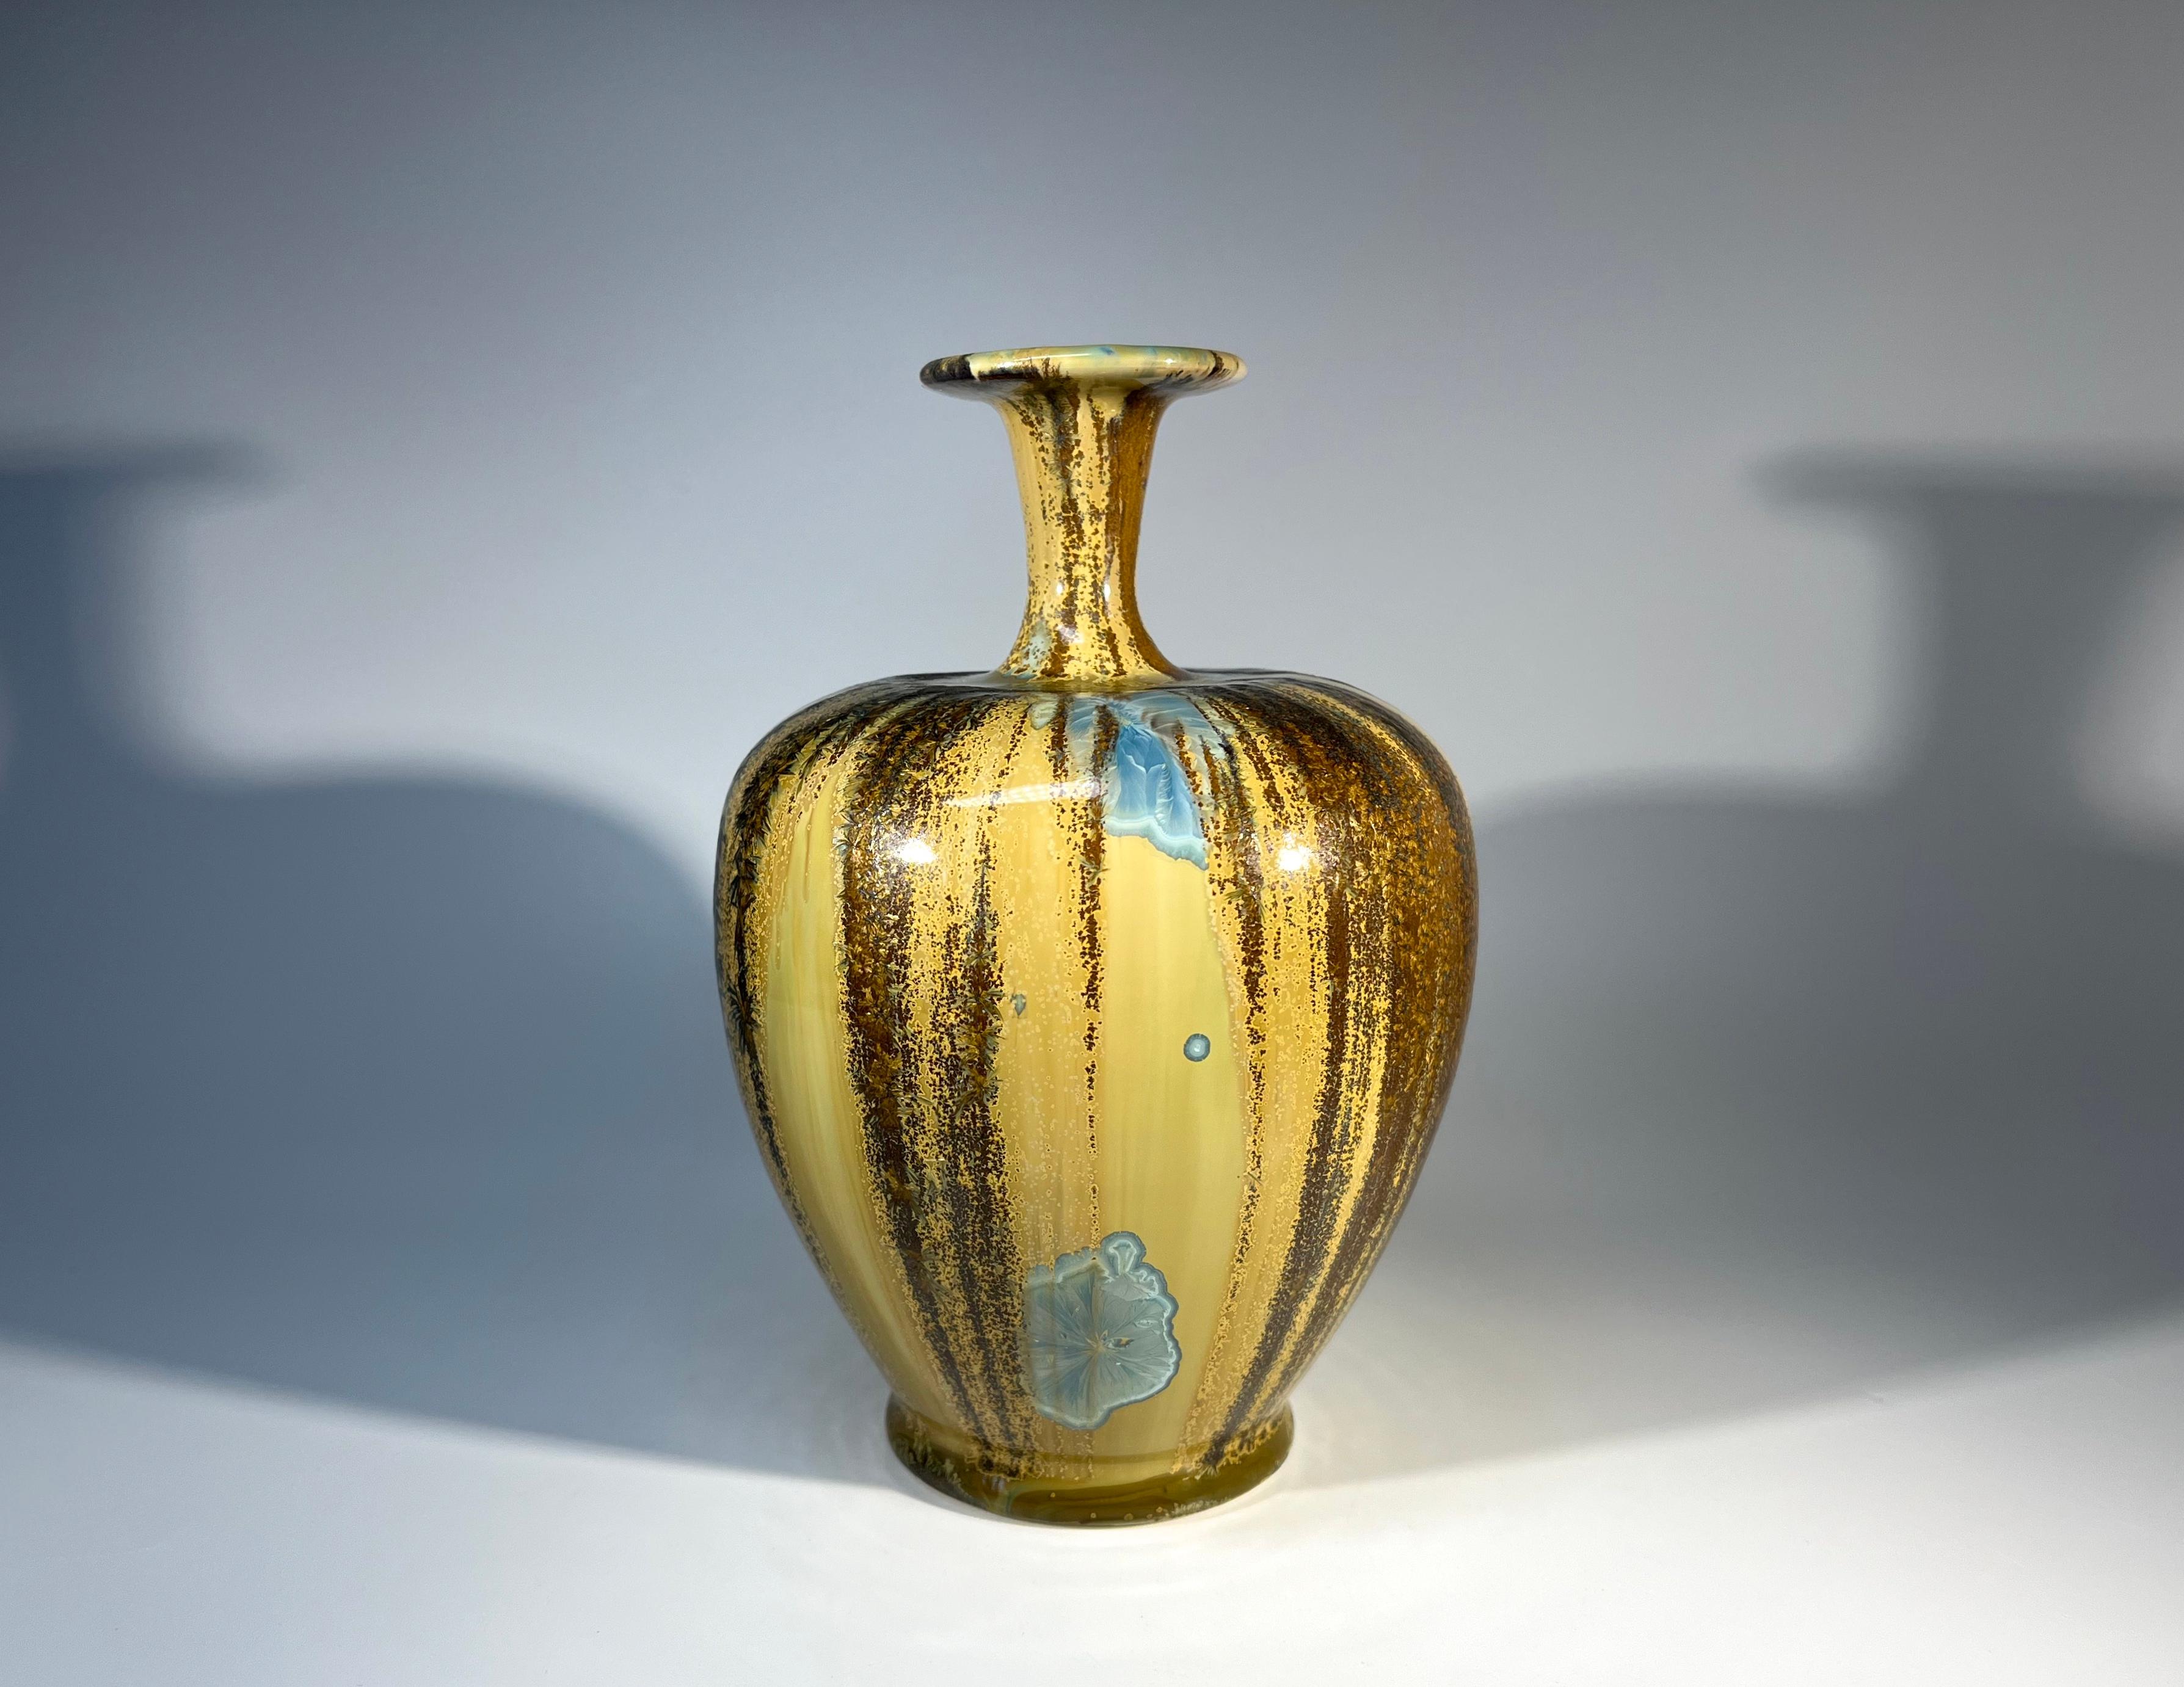 Stunning vase with crystalline glaze by the English craftsman Maurice Young of the Sussex Guild 
Warm tones of caramel and honey brown, cooled by icy pale blue crystals
A super example of English studio pottery creativeness and a worthy collectors